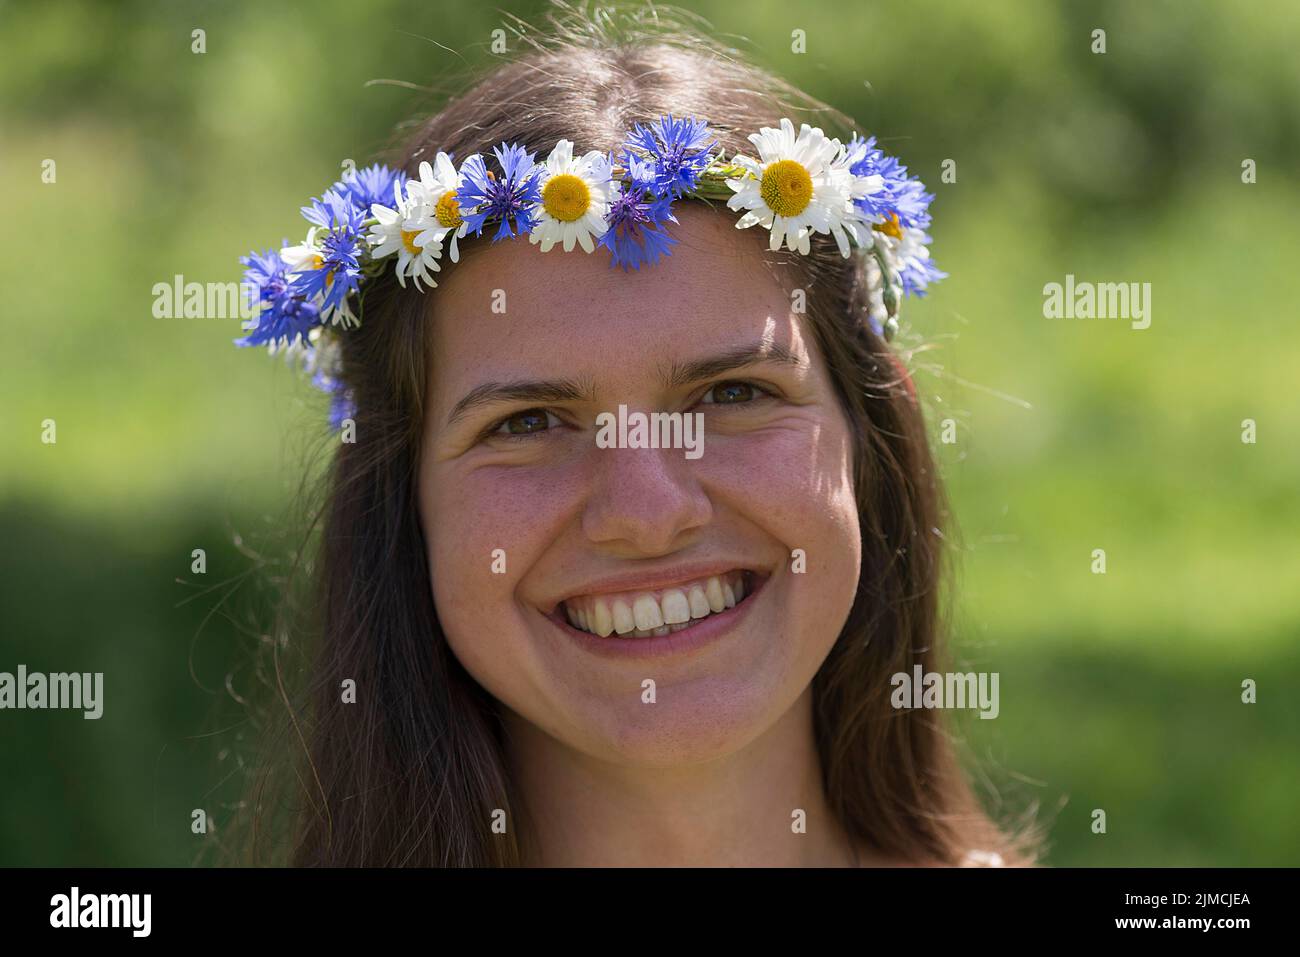 Portrait of a bride with a wreath of flowers in her hair, Mecklenburg-Western Pomerania, Germany, Europe Stock Photo